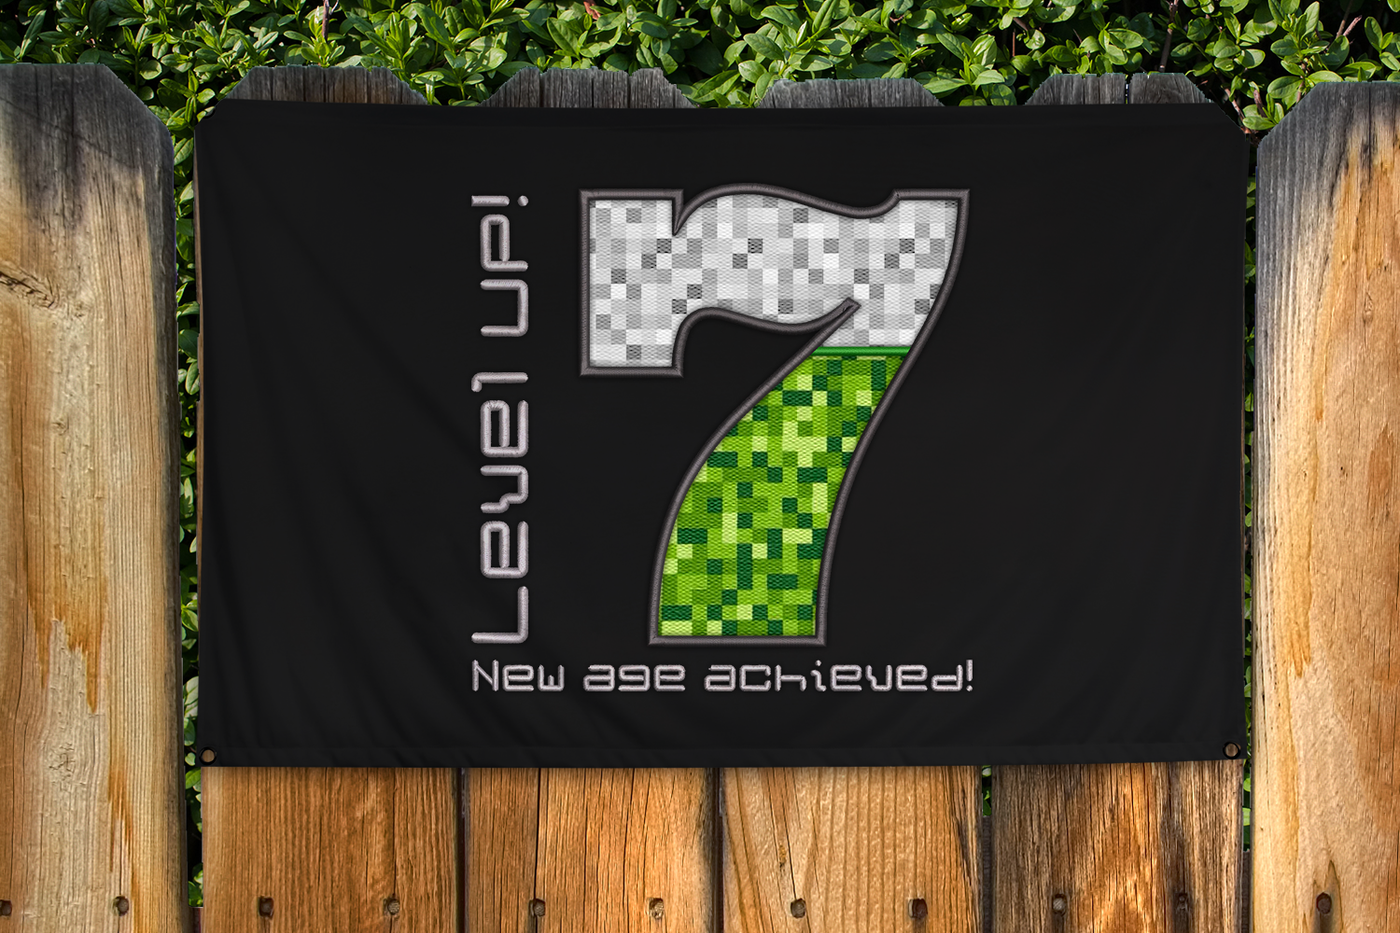 Party flag with large applique 7. Around the number is embroidered "Level UP! New age achieved!"